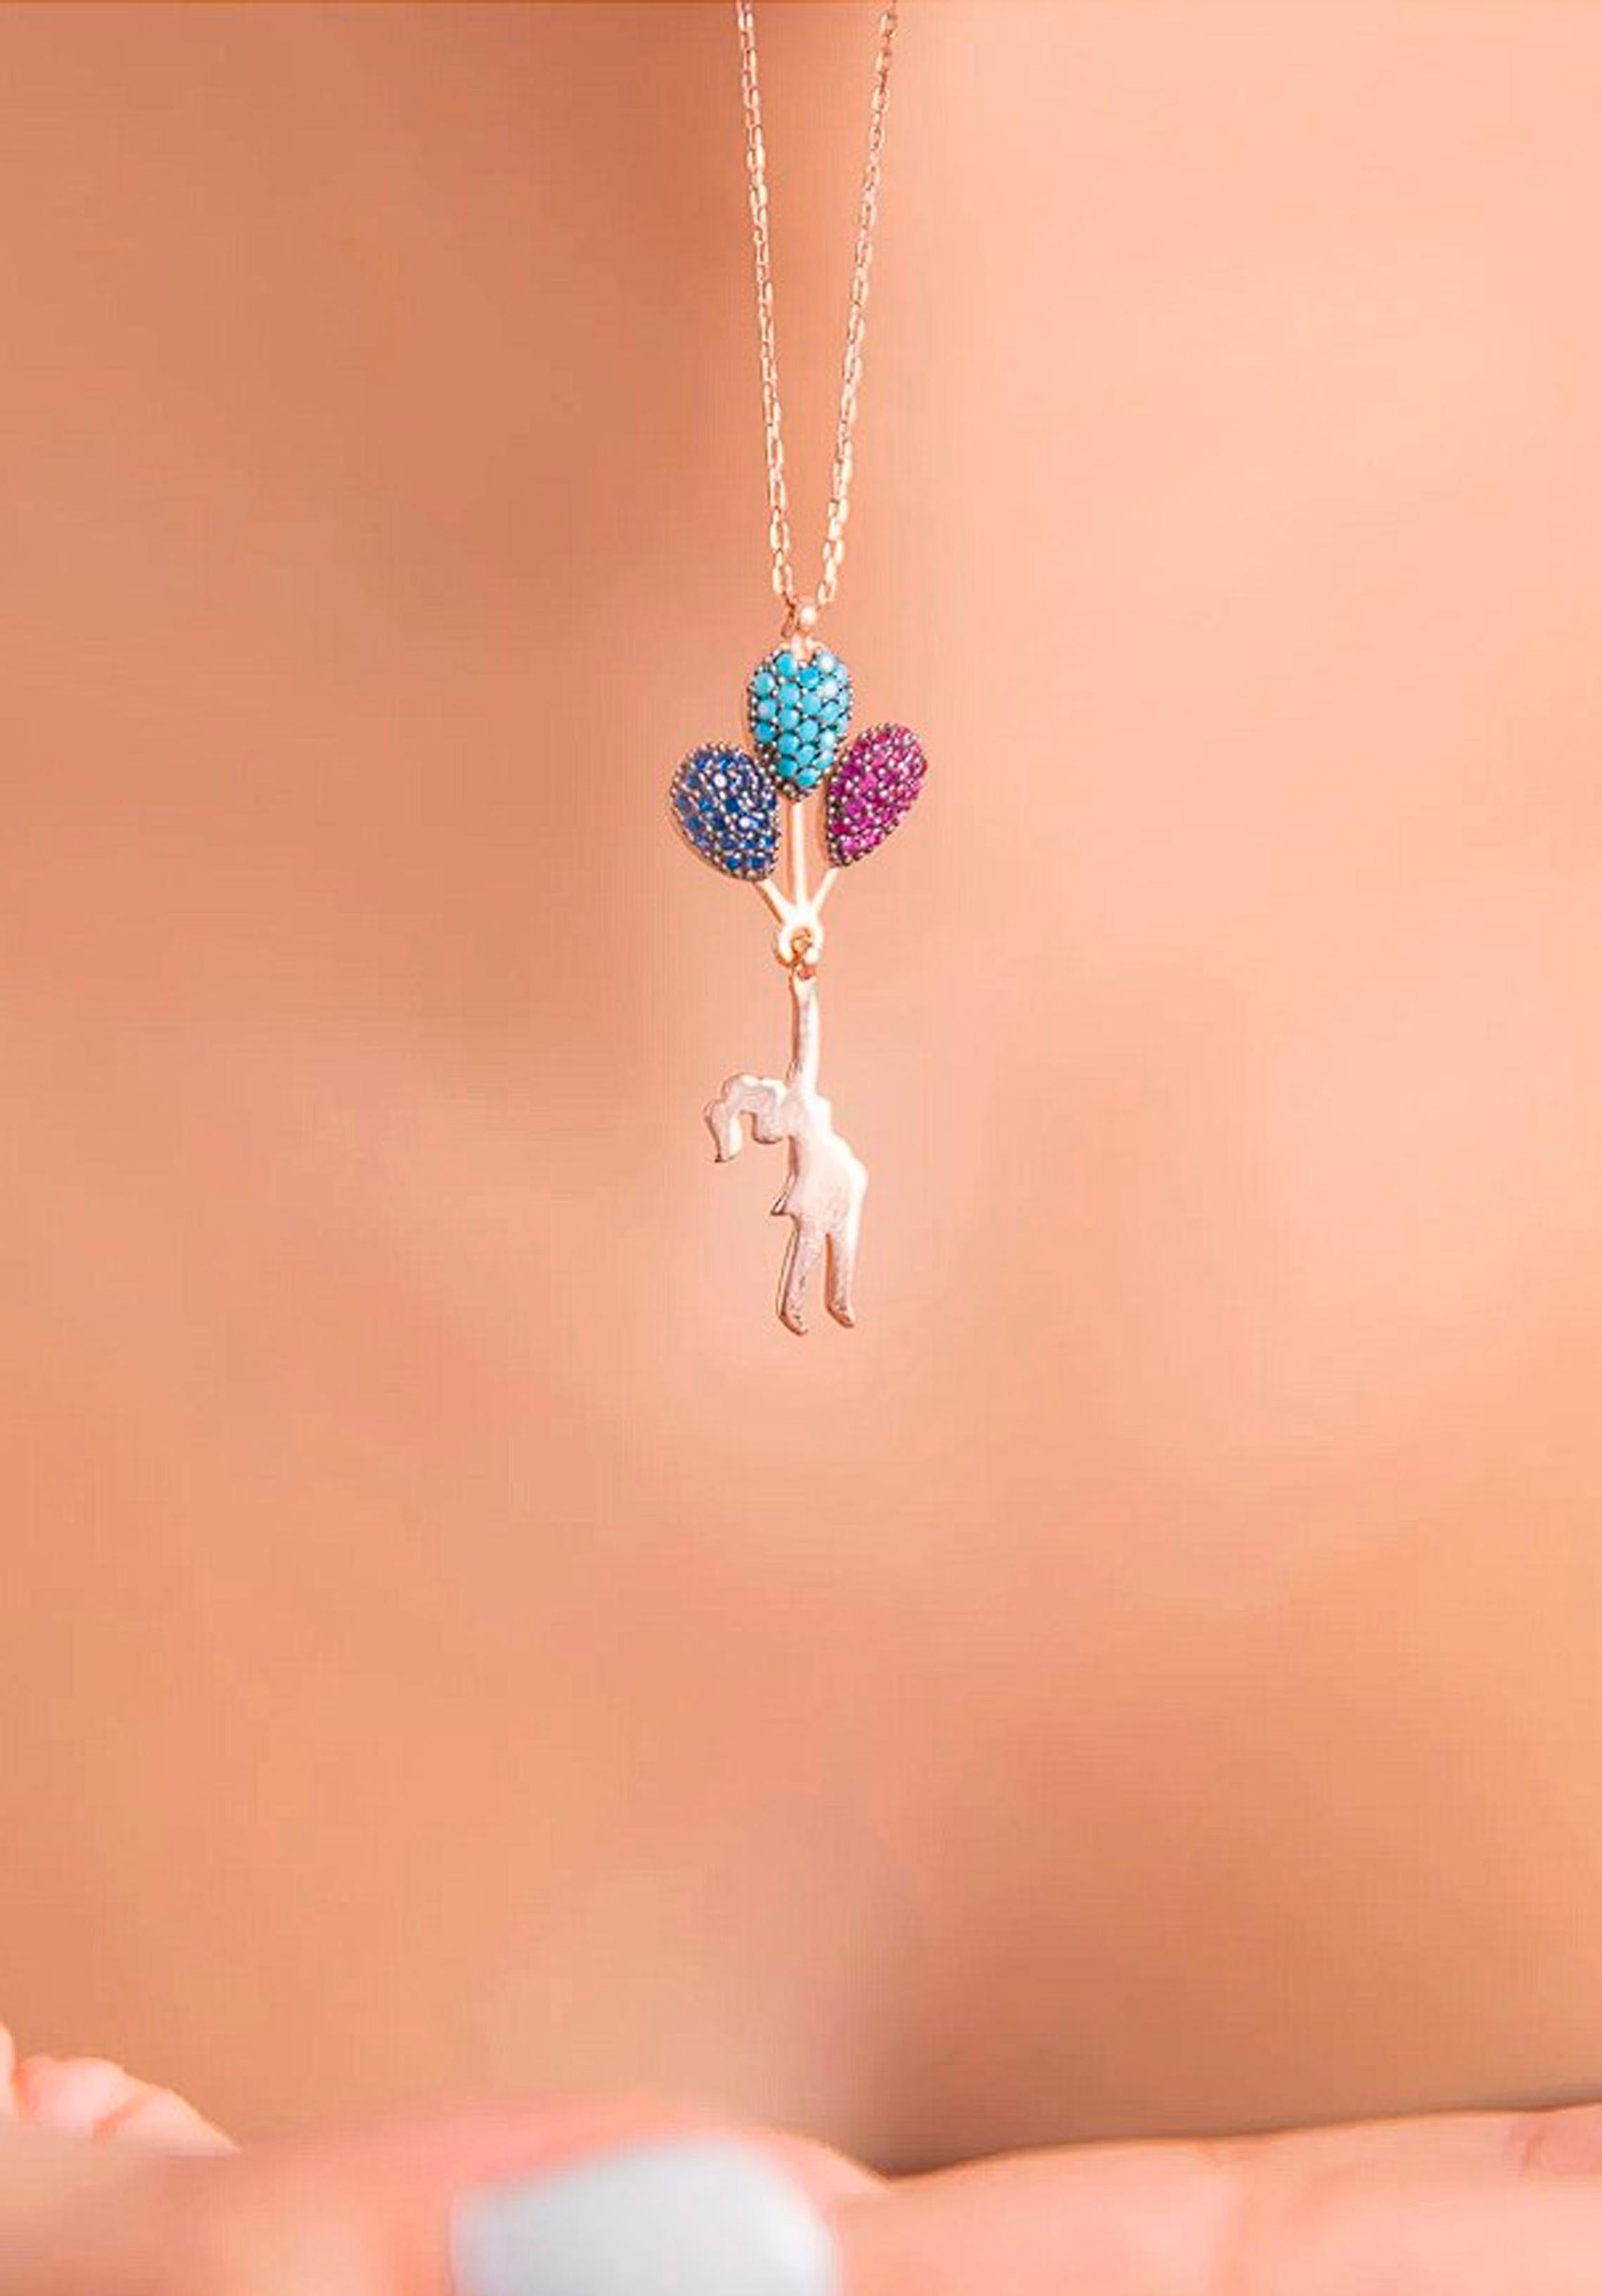 Modern Girl on baloons pendant necklace